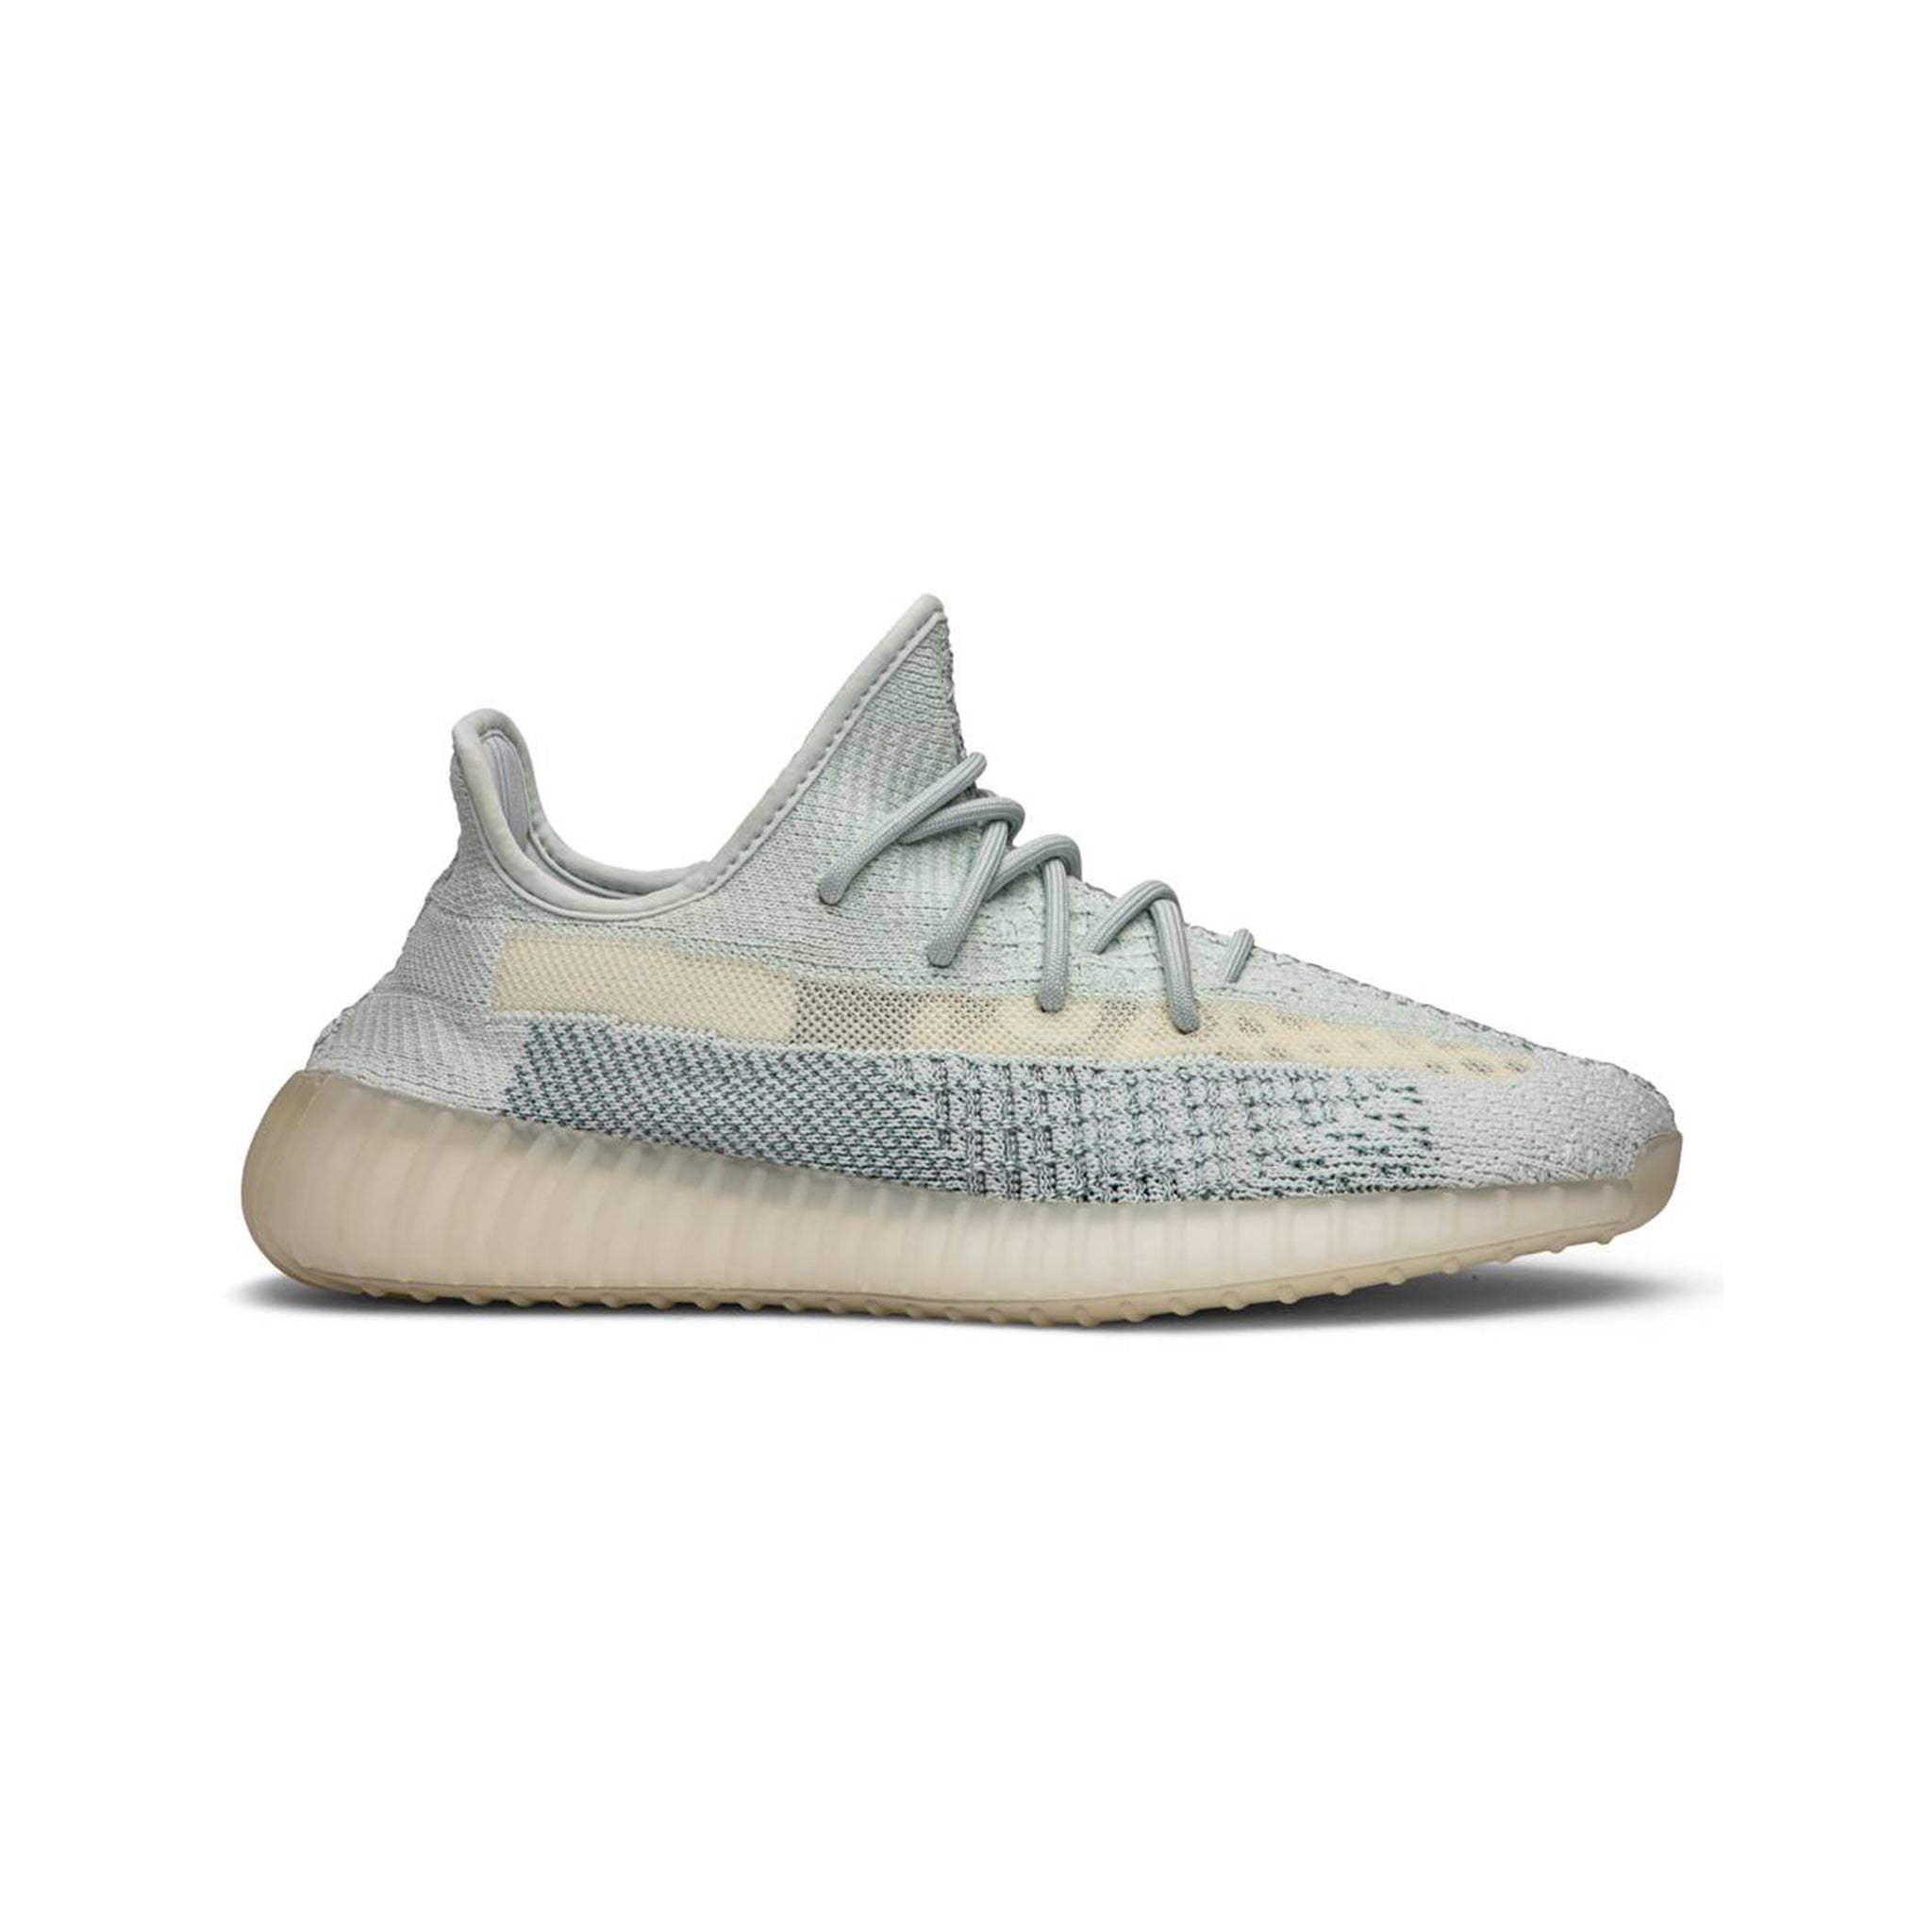 ADIDAS YEEZY BOOST 350 V2 CLOUD WHITE (REFLECTIVE)